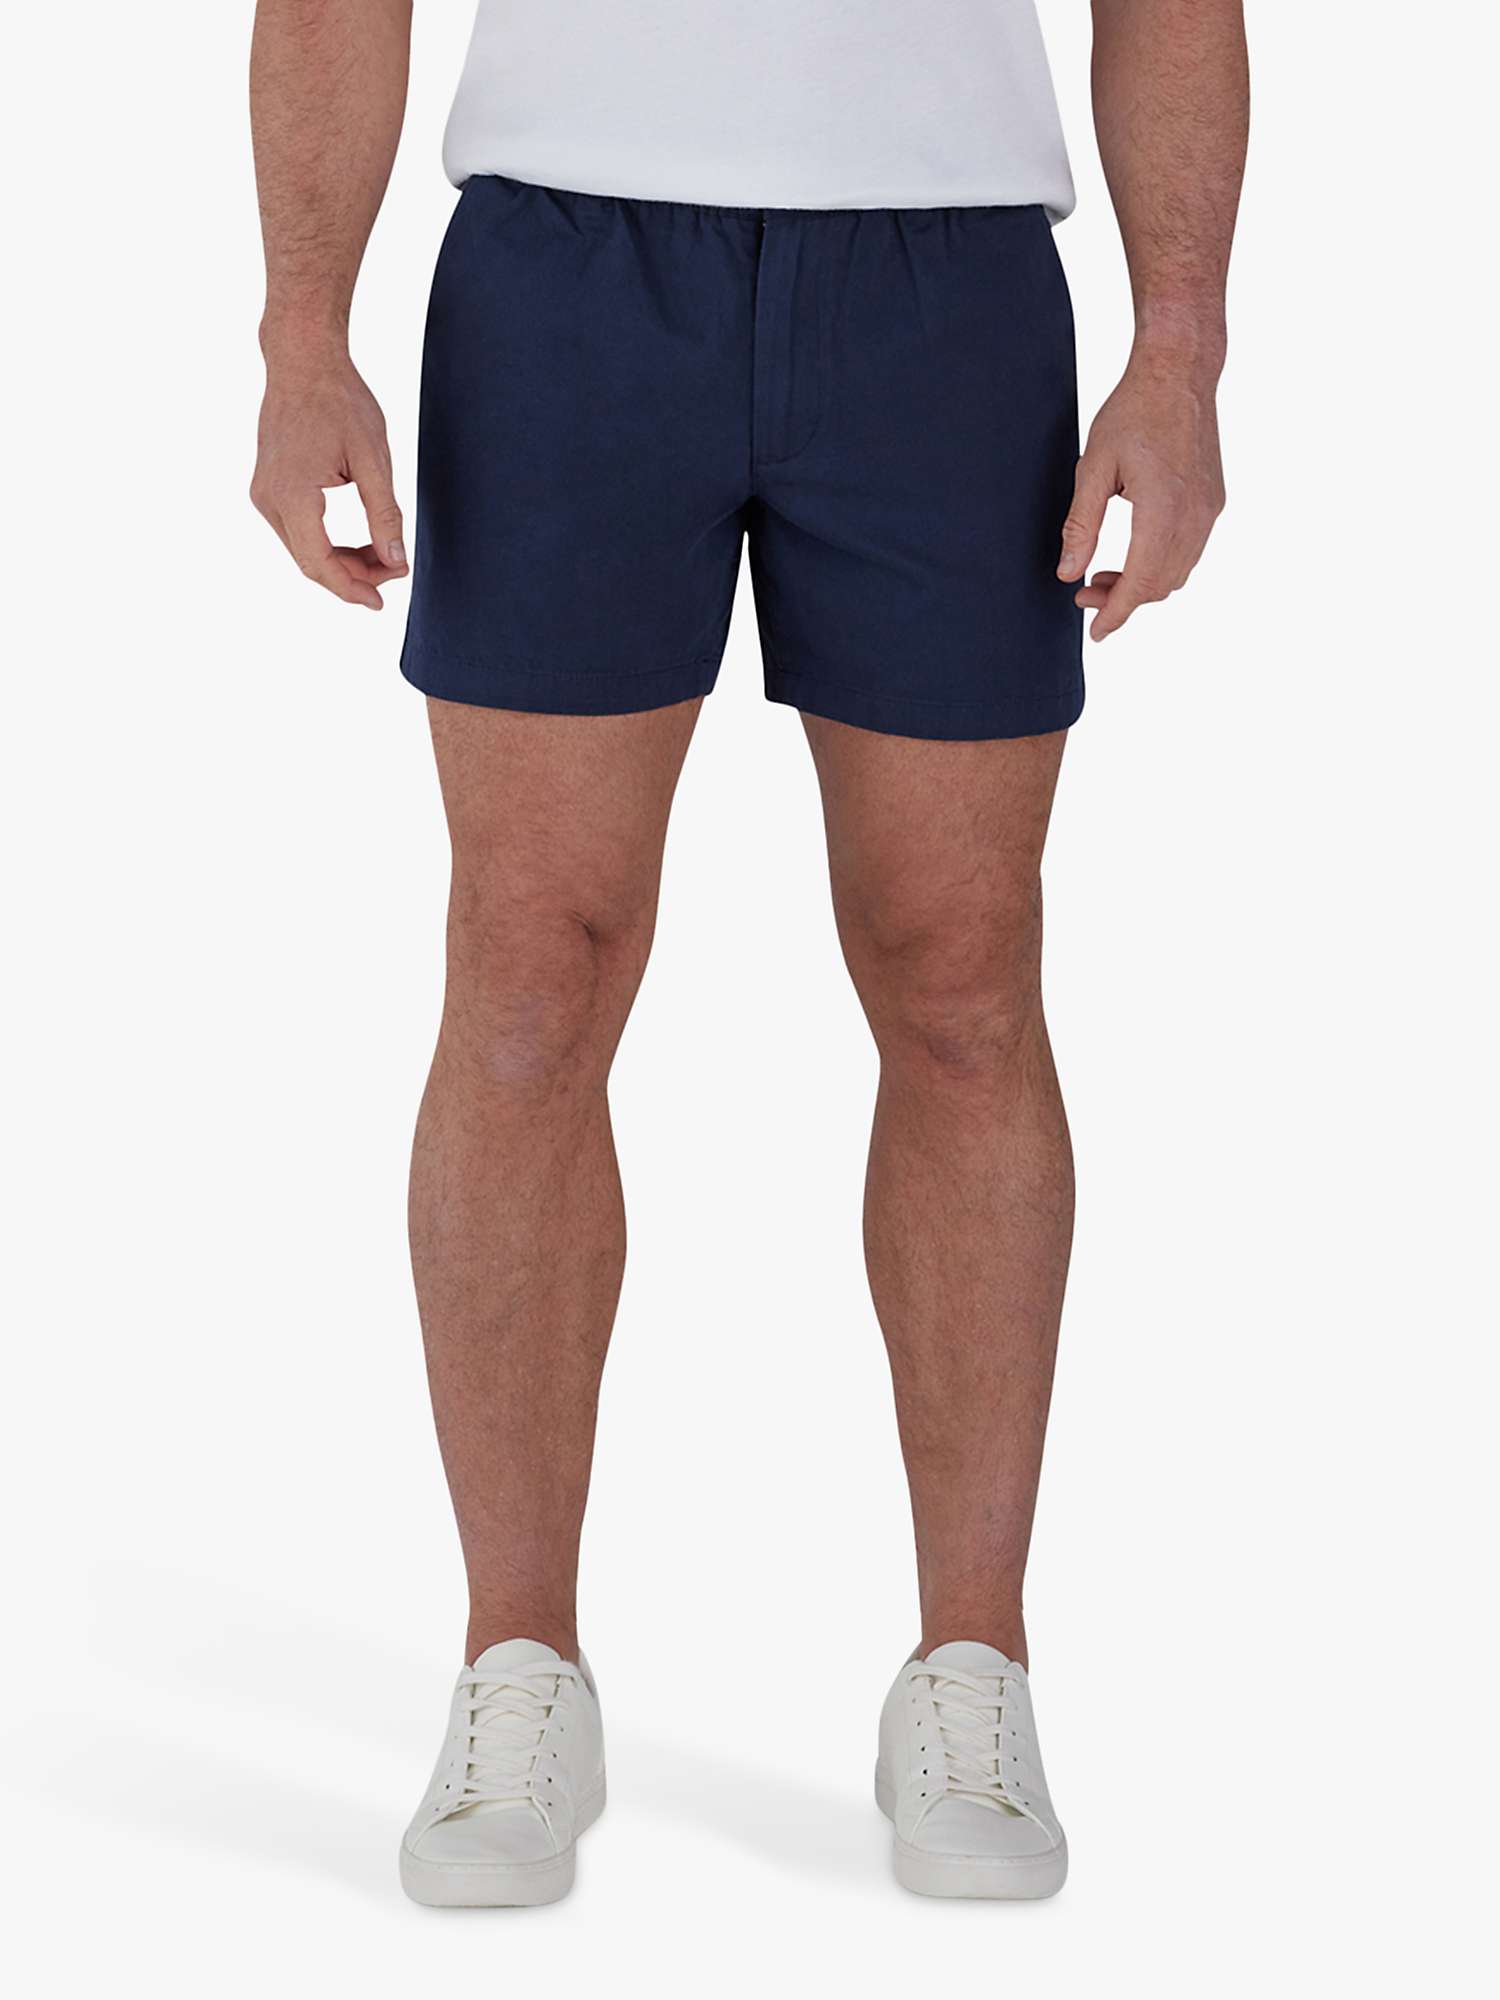 Buy Raging Bull Stretch Chino Shorts Online at johnlewis.com